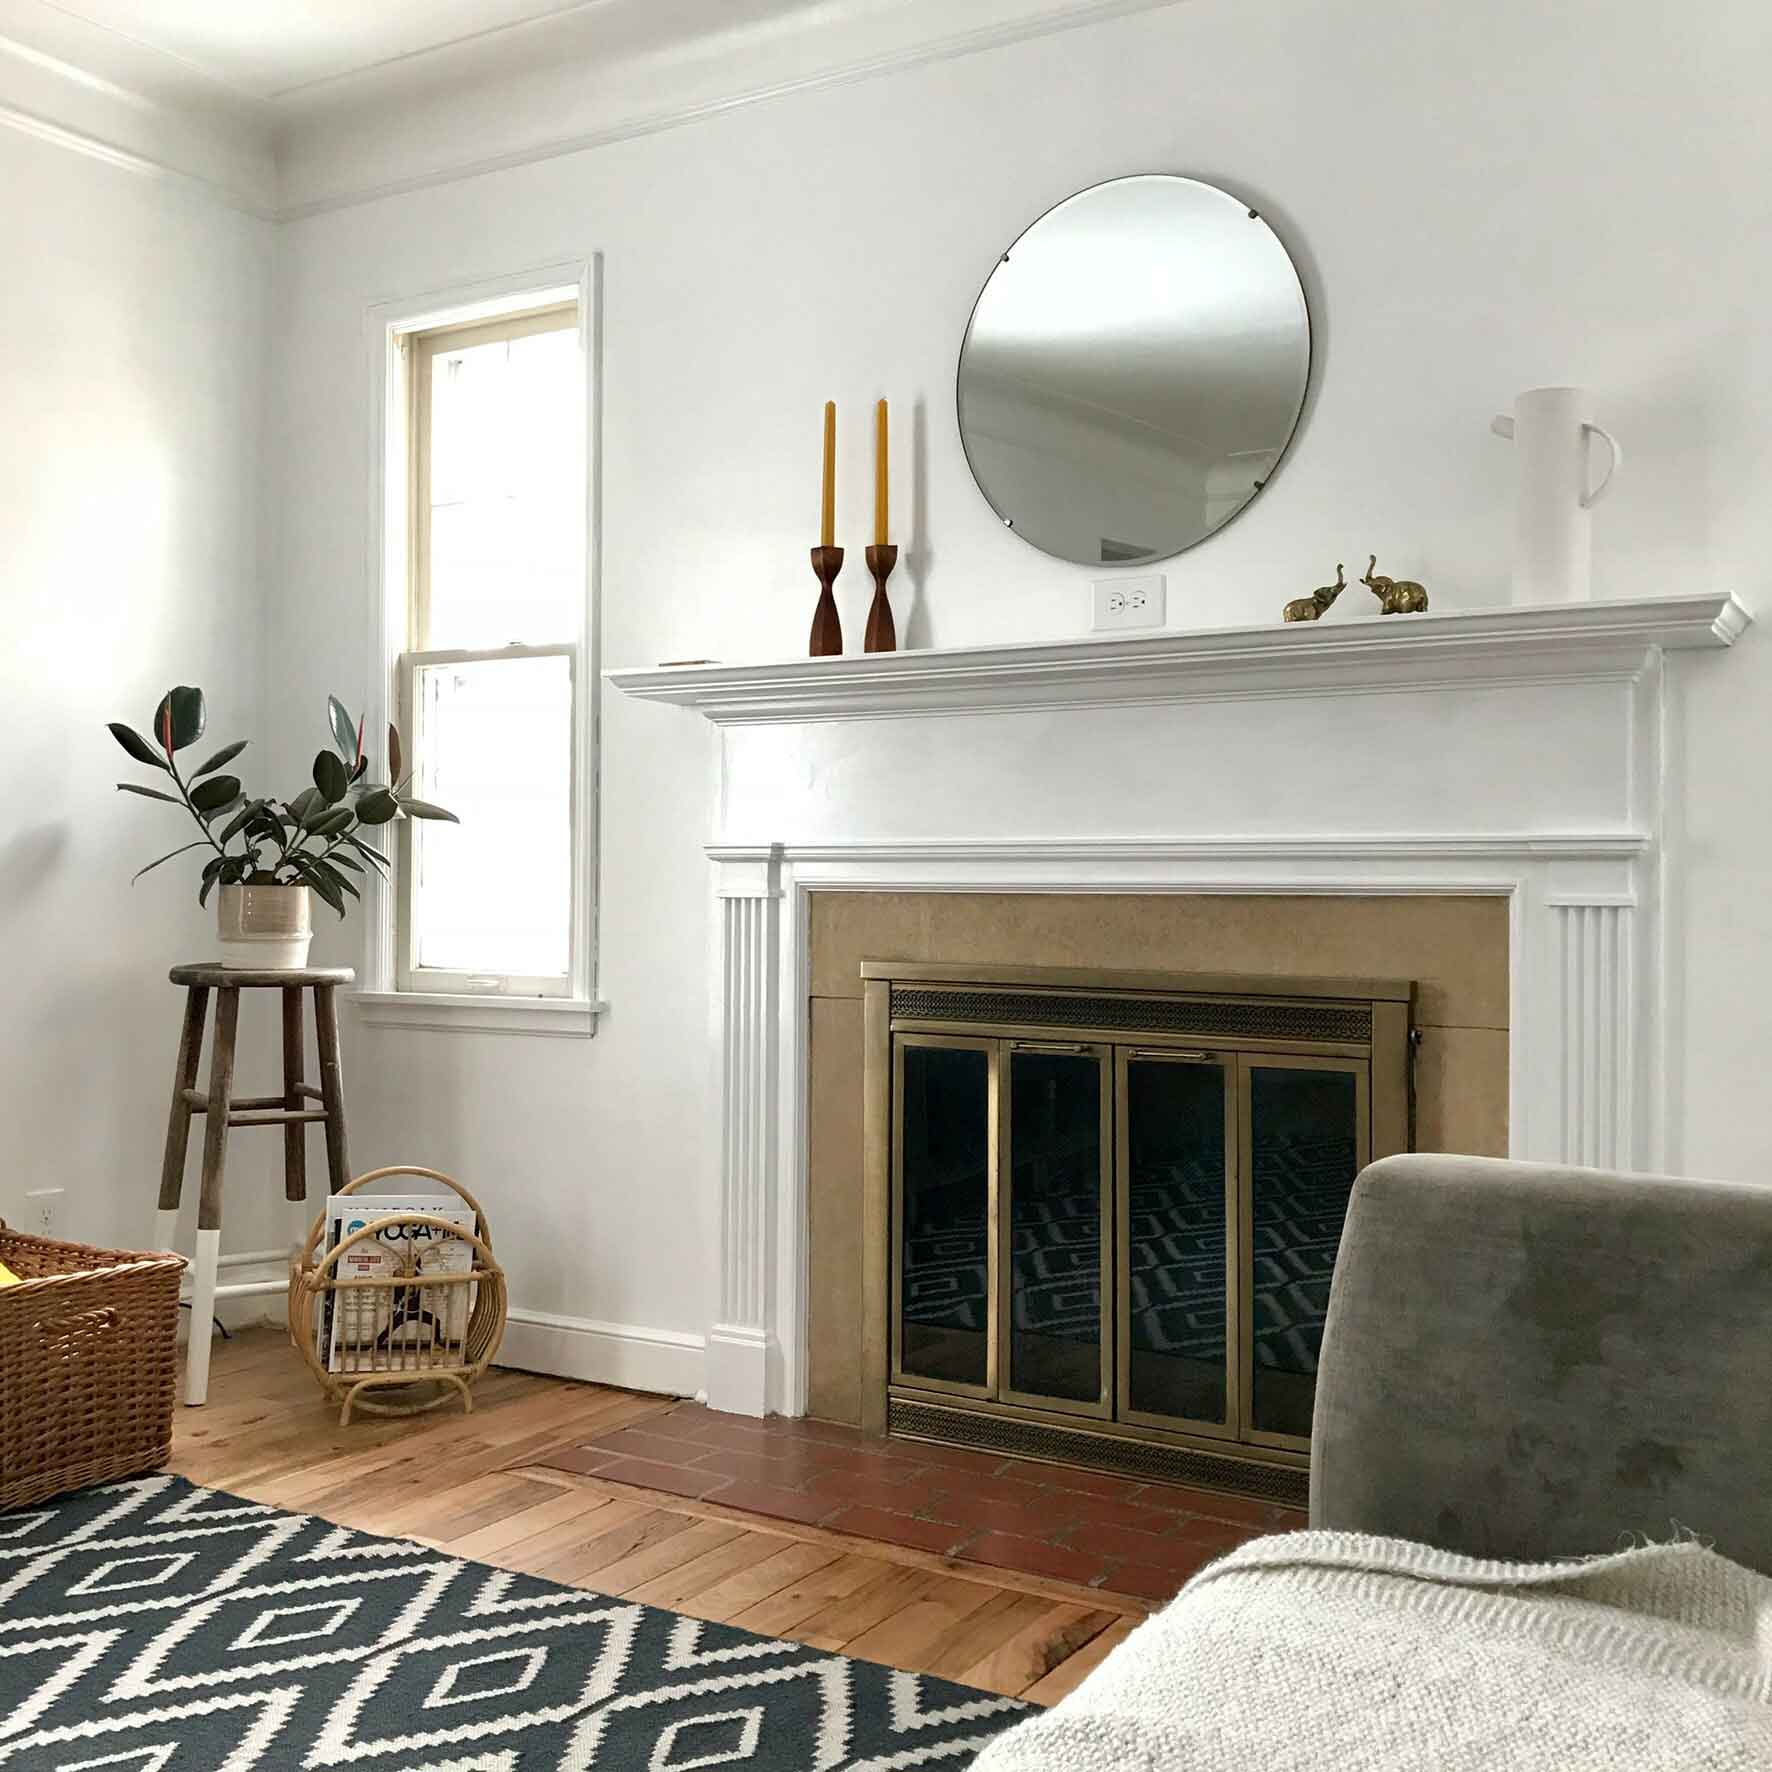 mirror above fireplace